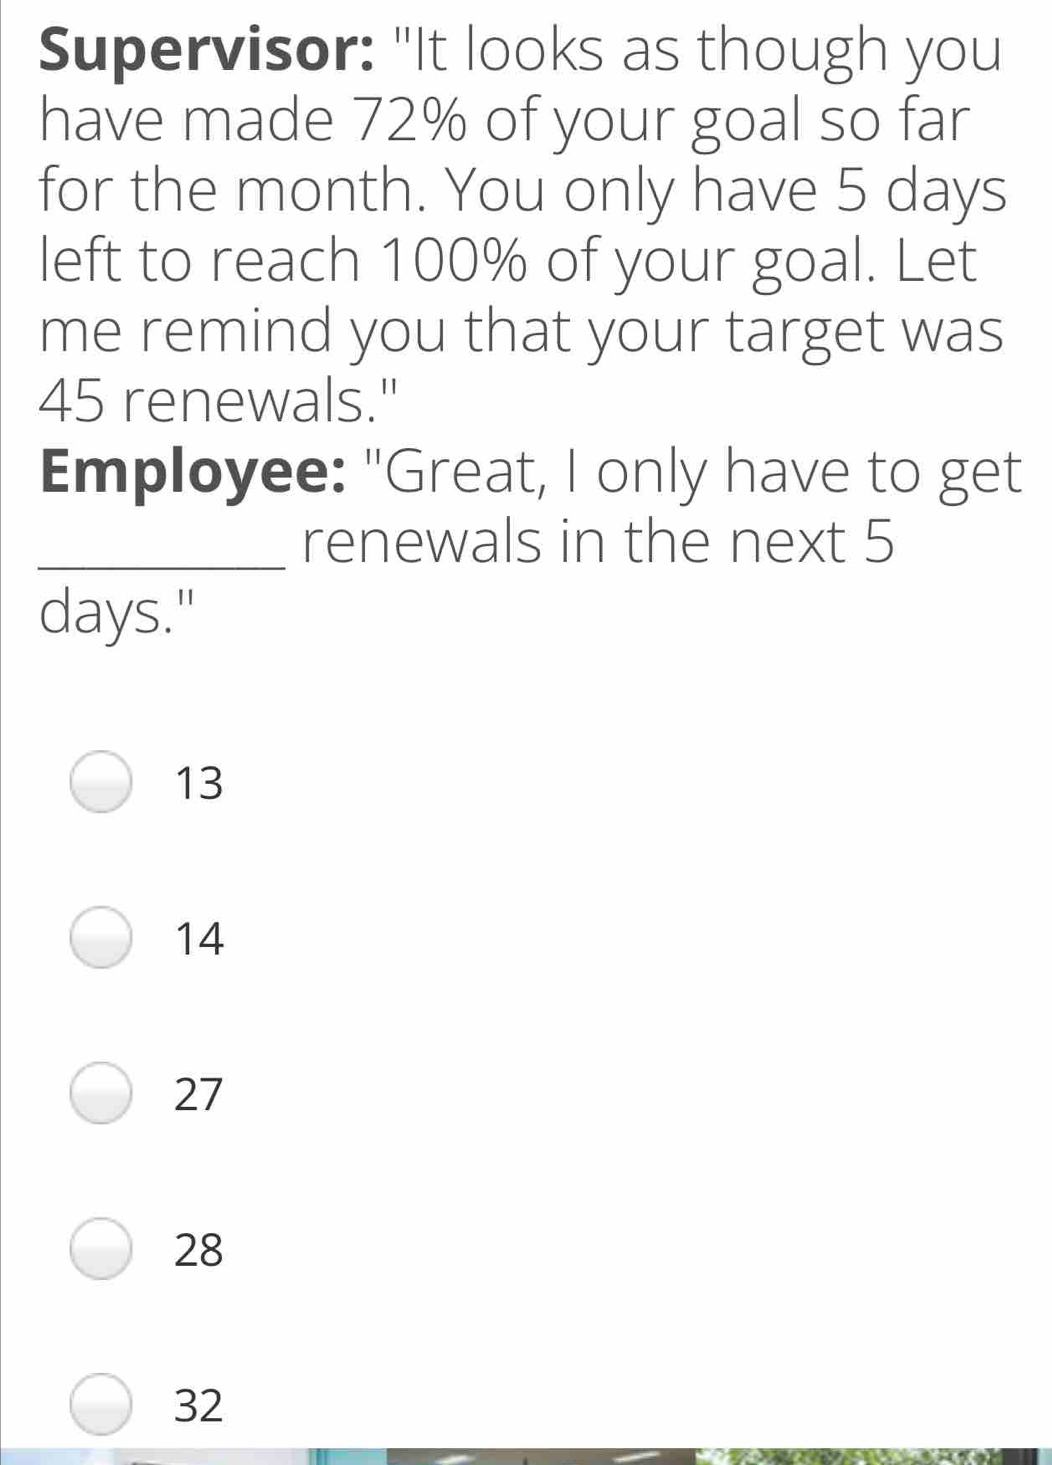 Supervisor: "It looks as though you have made 72% of your goal so far for the month. You only have 5 days left to reach 100% of your goal. Let me remind you that your target was 45 renewals." Employee: "Great, I only have to get _renewals in the next 5 days." 13 14 27 28 32